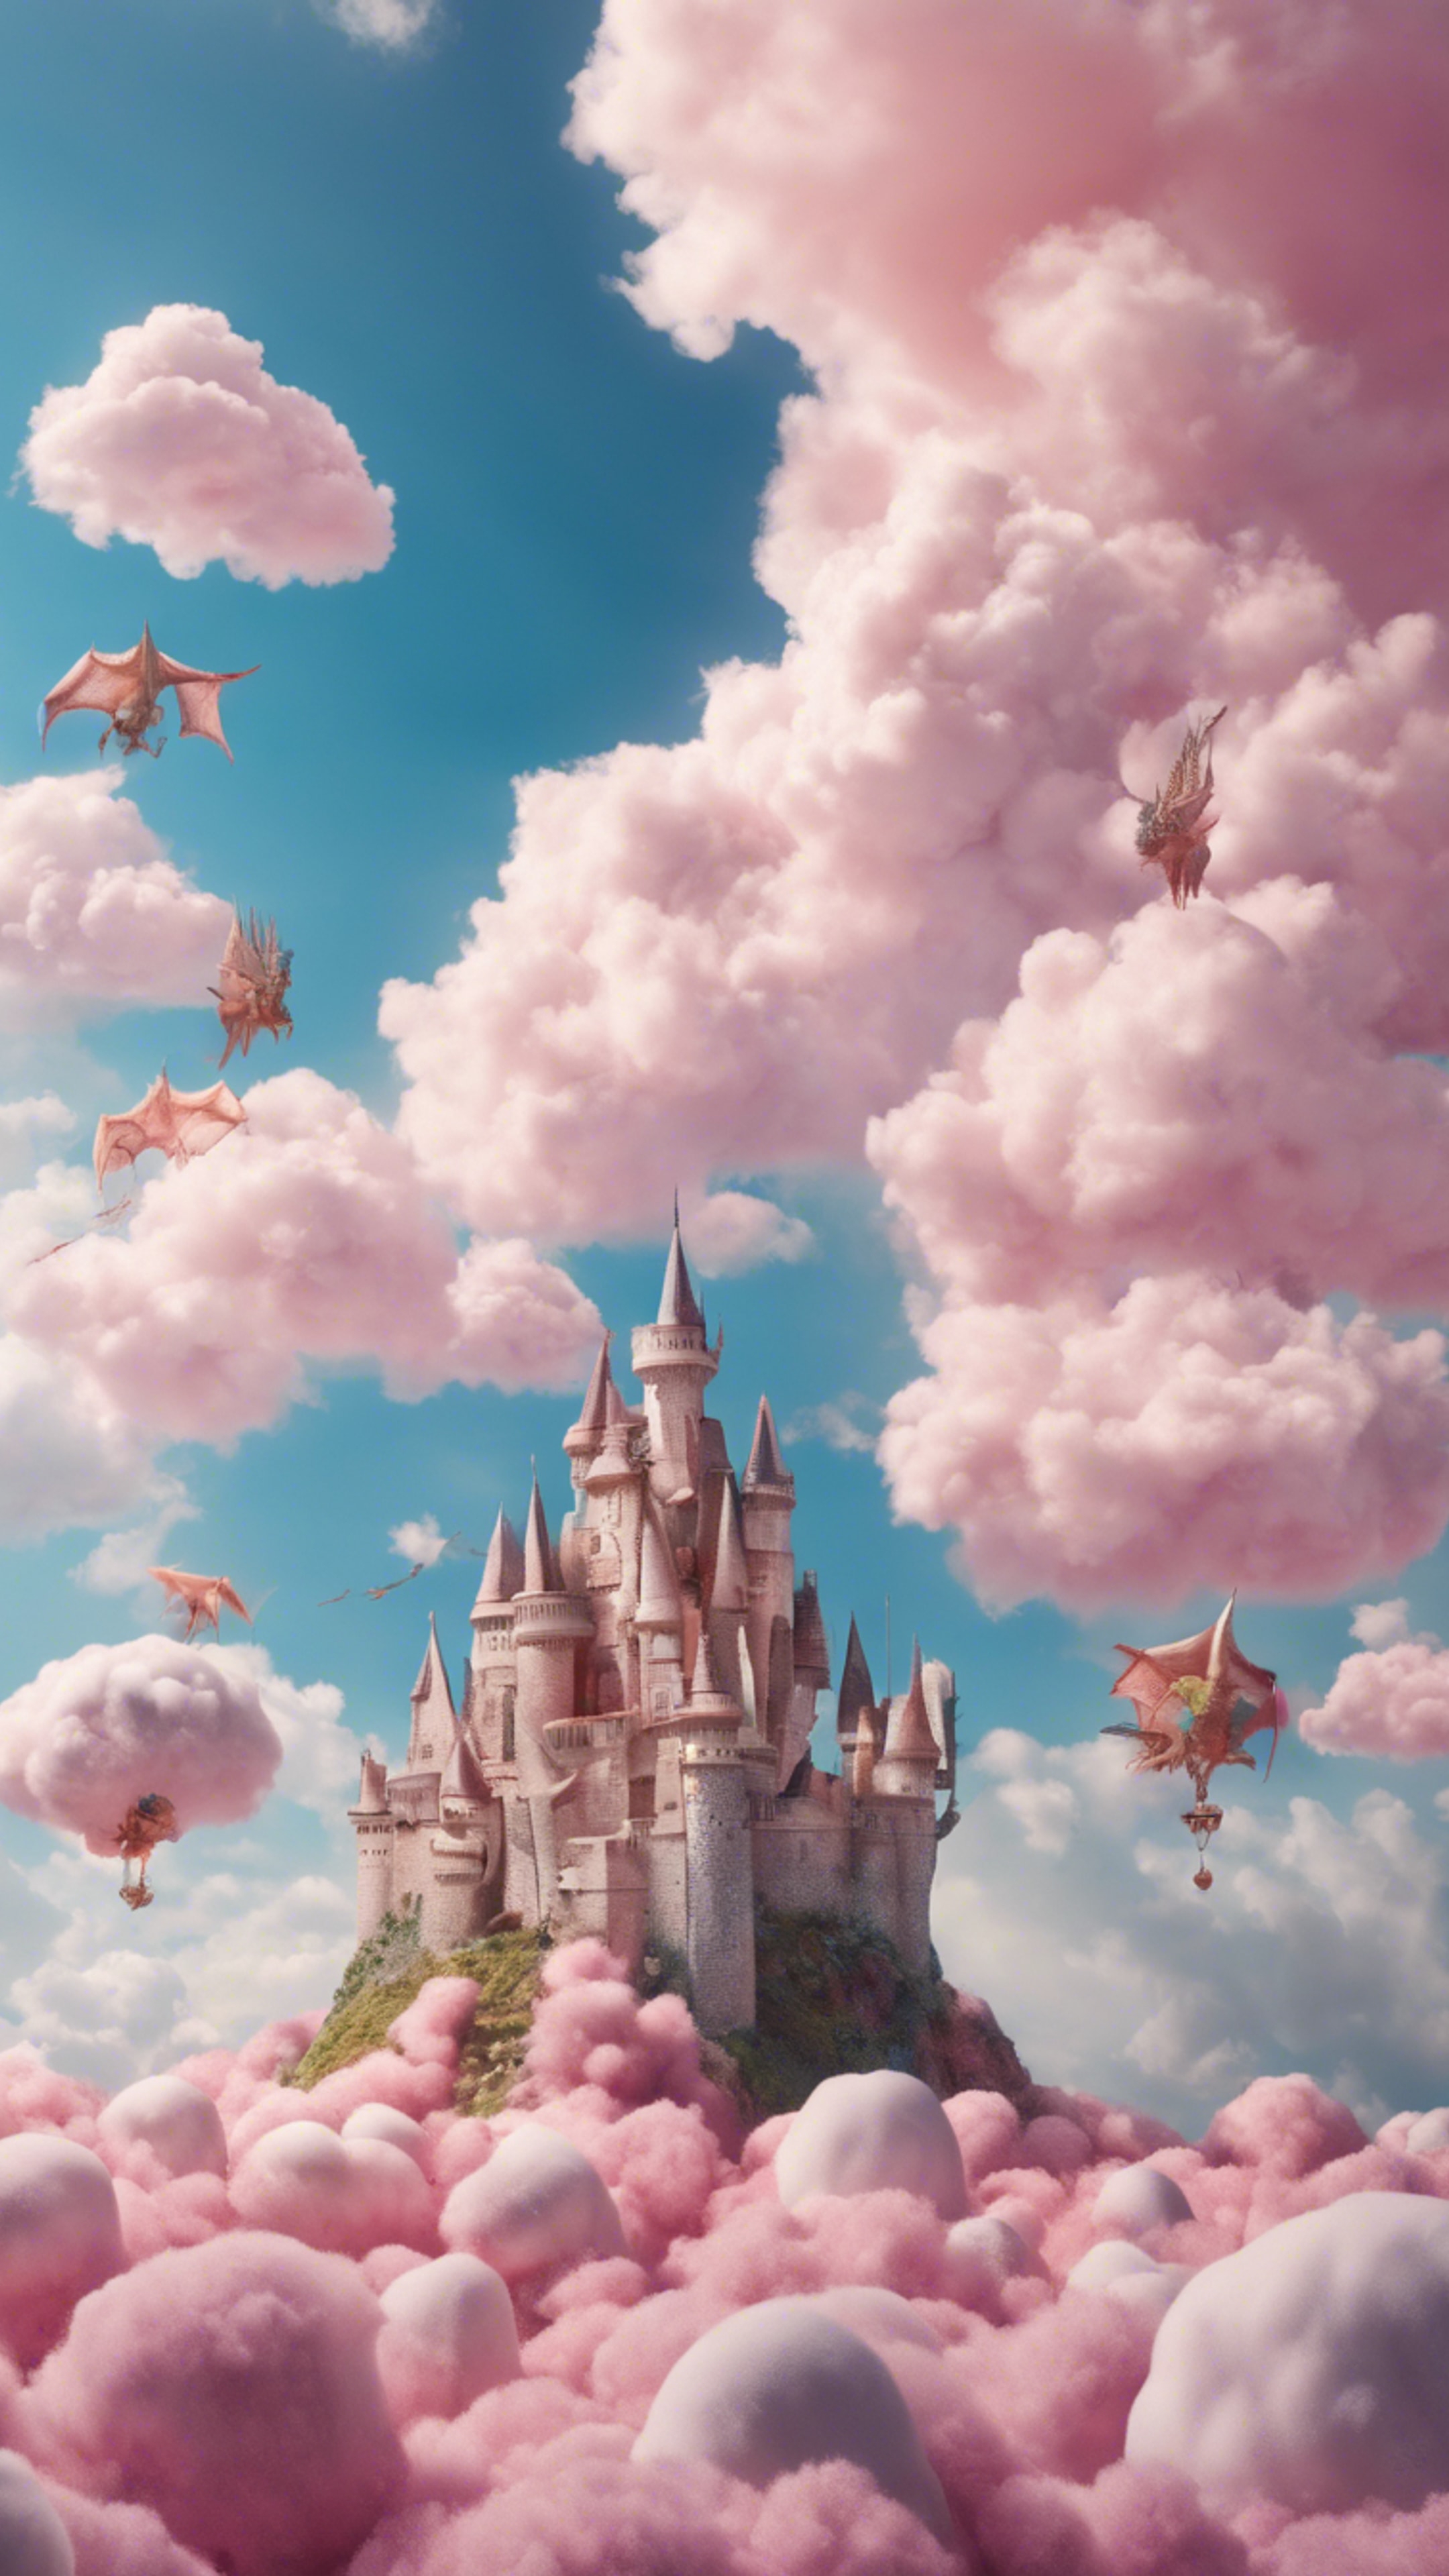 A castle floating in the sky above fluffy, cotton-candy-like clouds surrounded by a huddle of playful, magical dragons. Behang[be63bba74c3941c98c10]